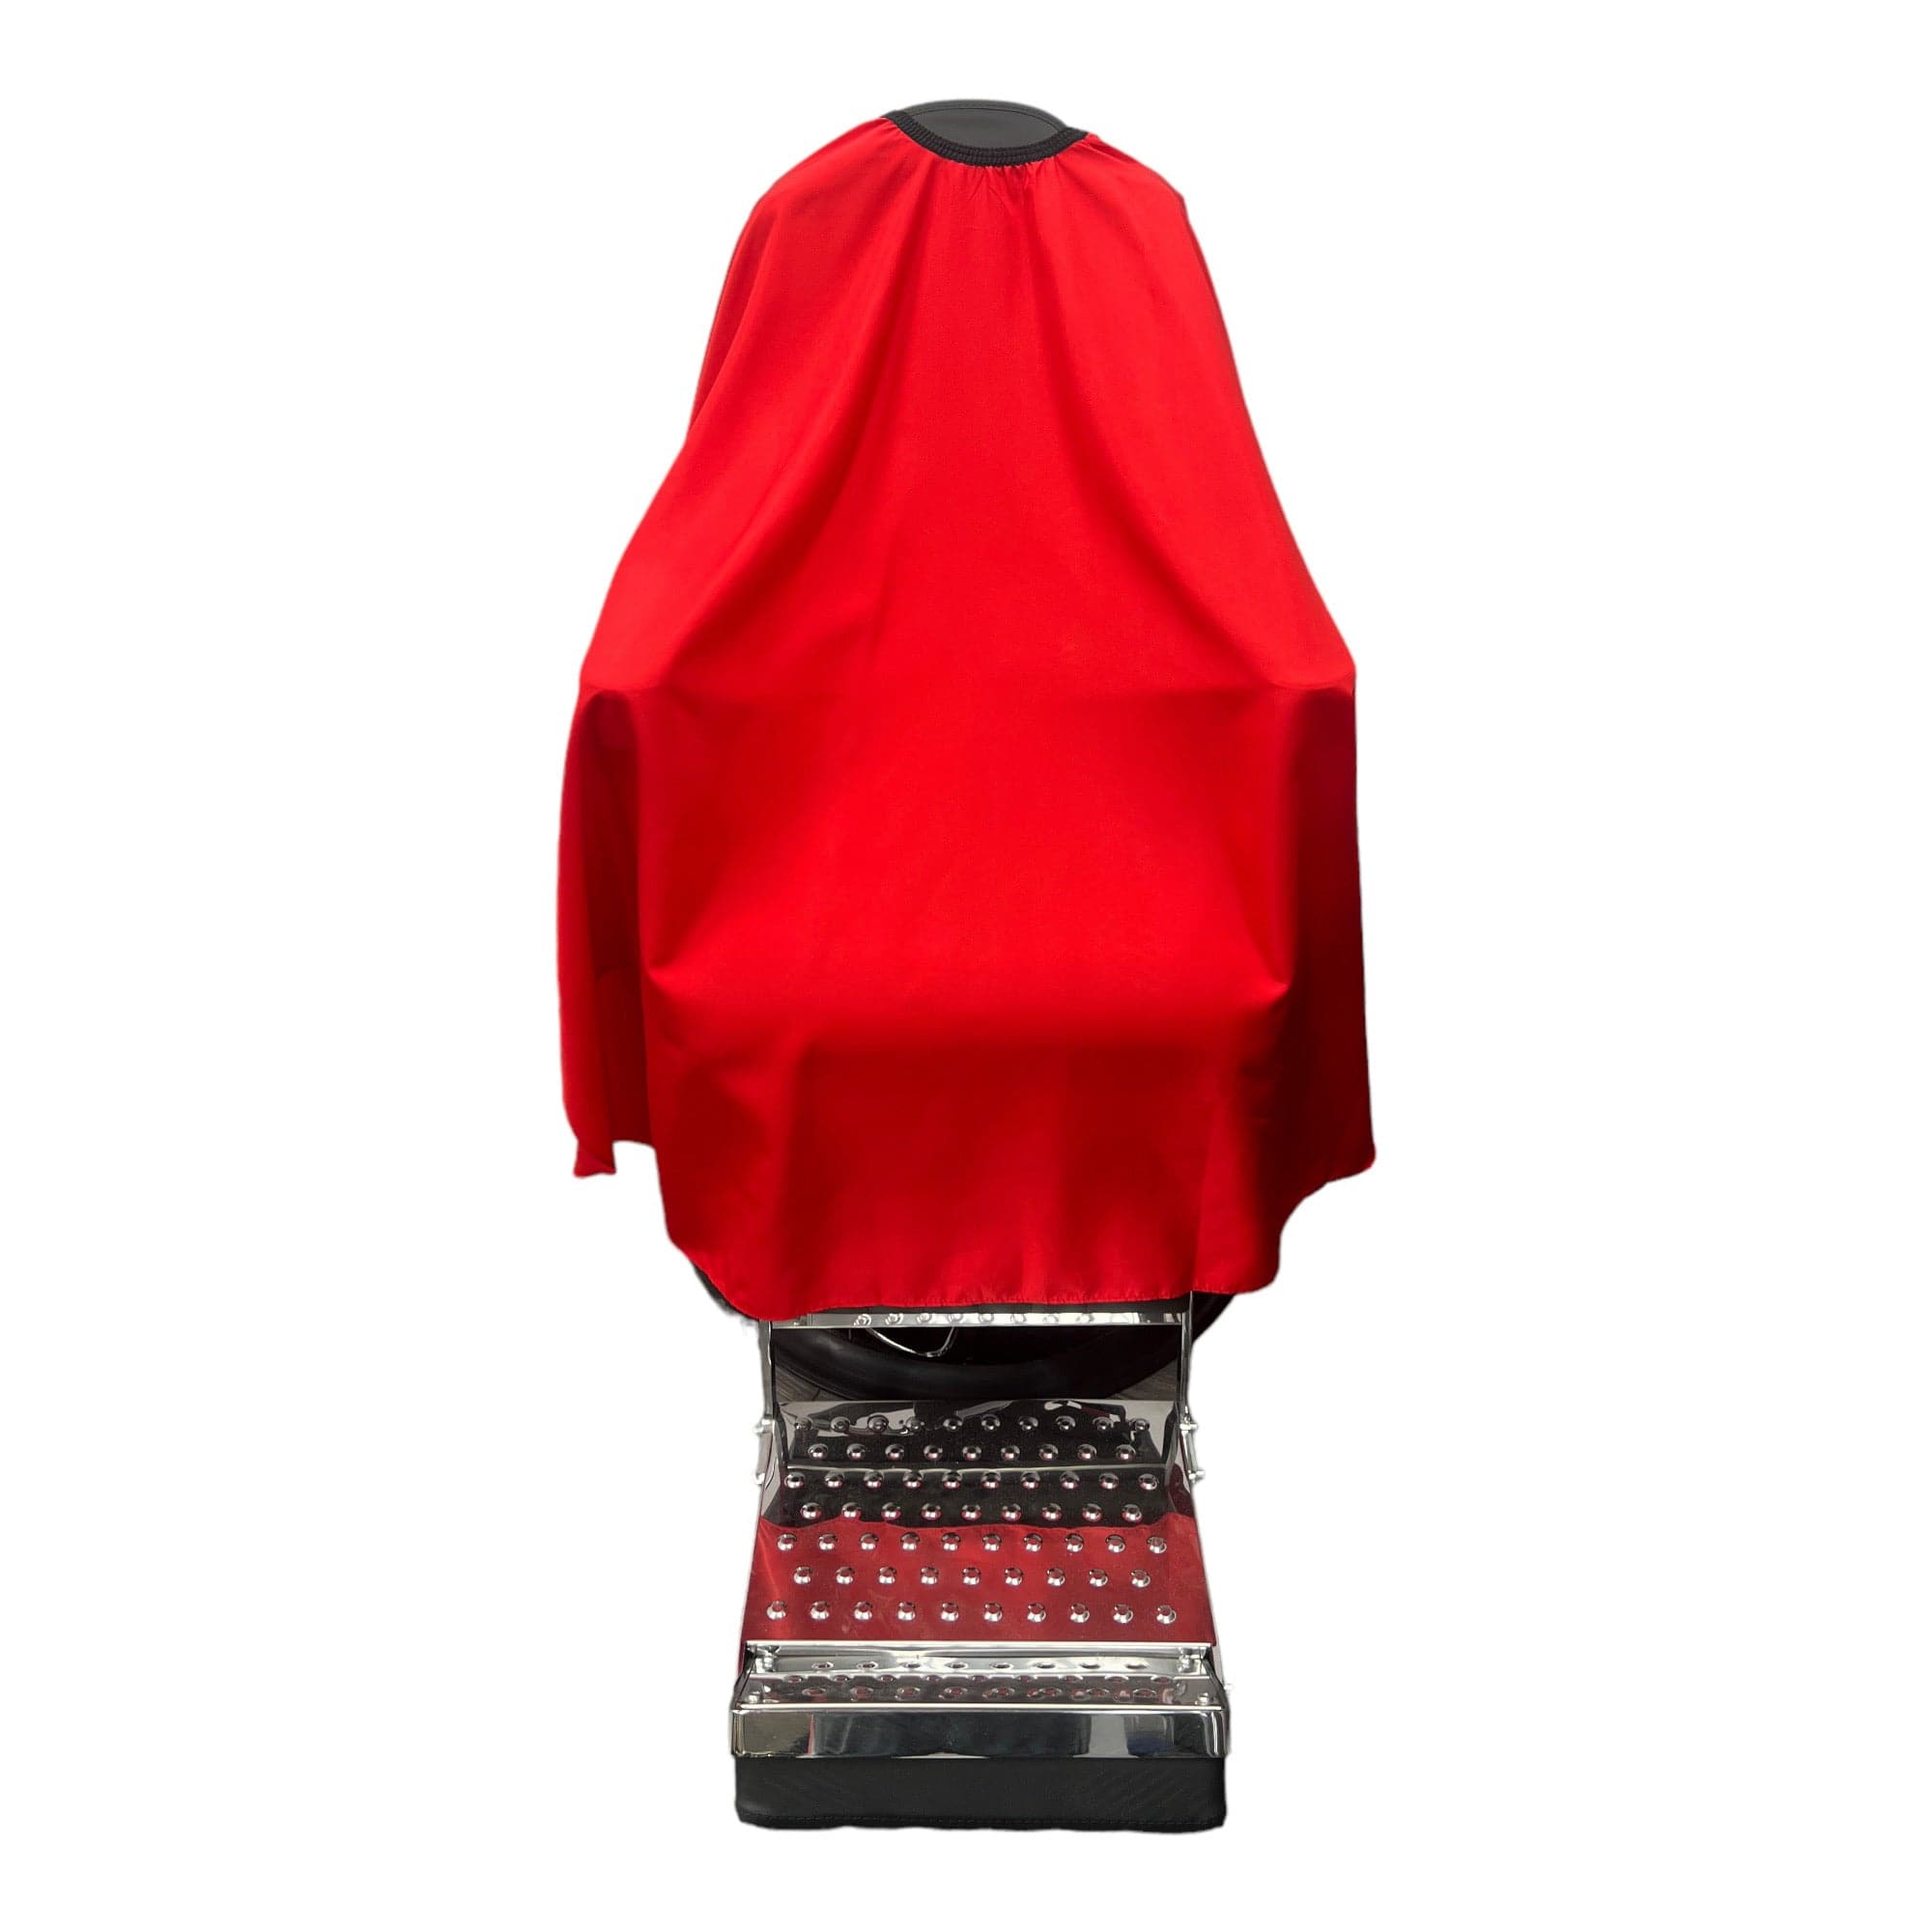 Gabri - Barber Hairdressing Hair Cutting Capes & Gowns Plain Red